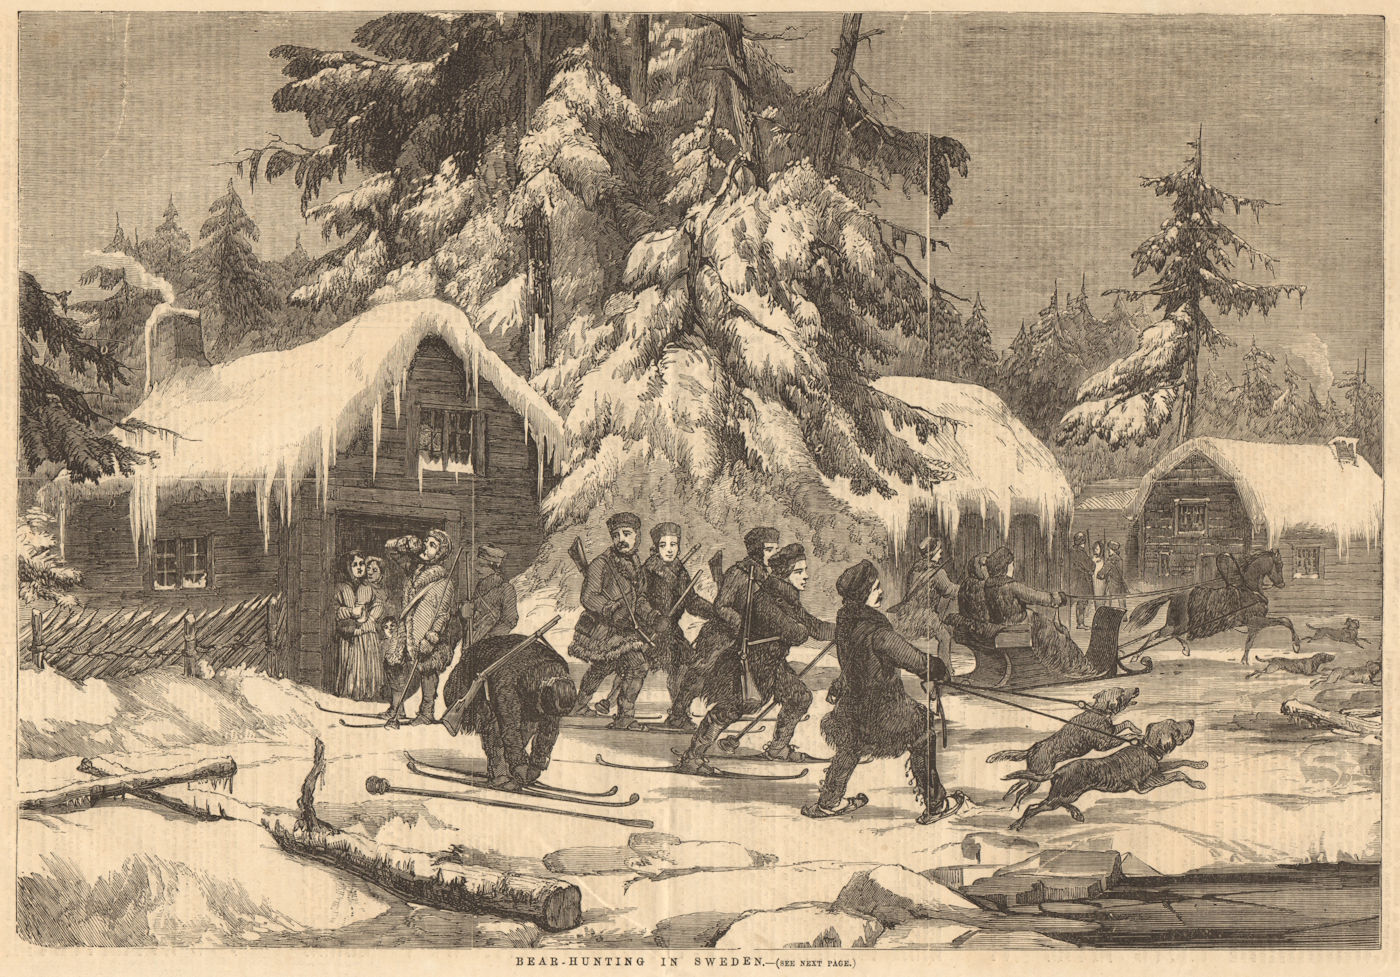 Associate Product Bear hunting in Sweden on skis with sledges & dogs. Skiing 1856 old print